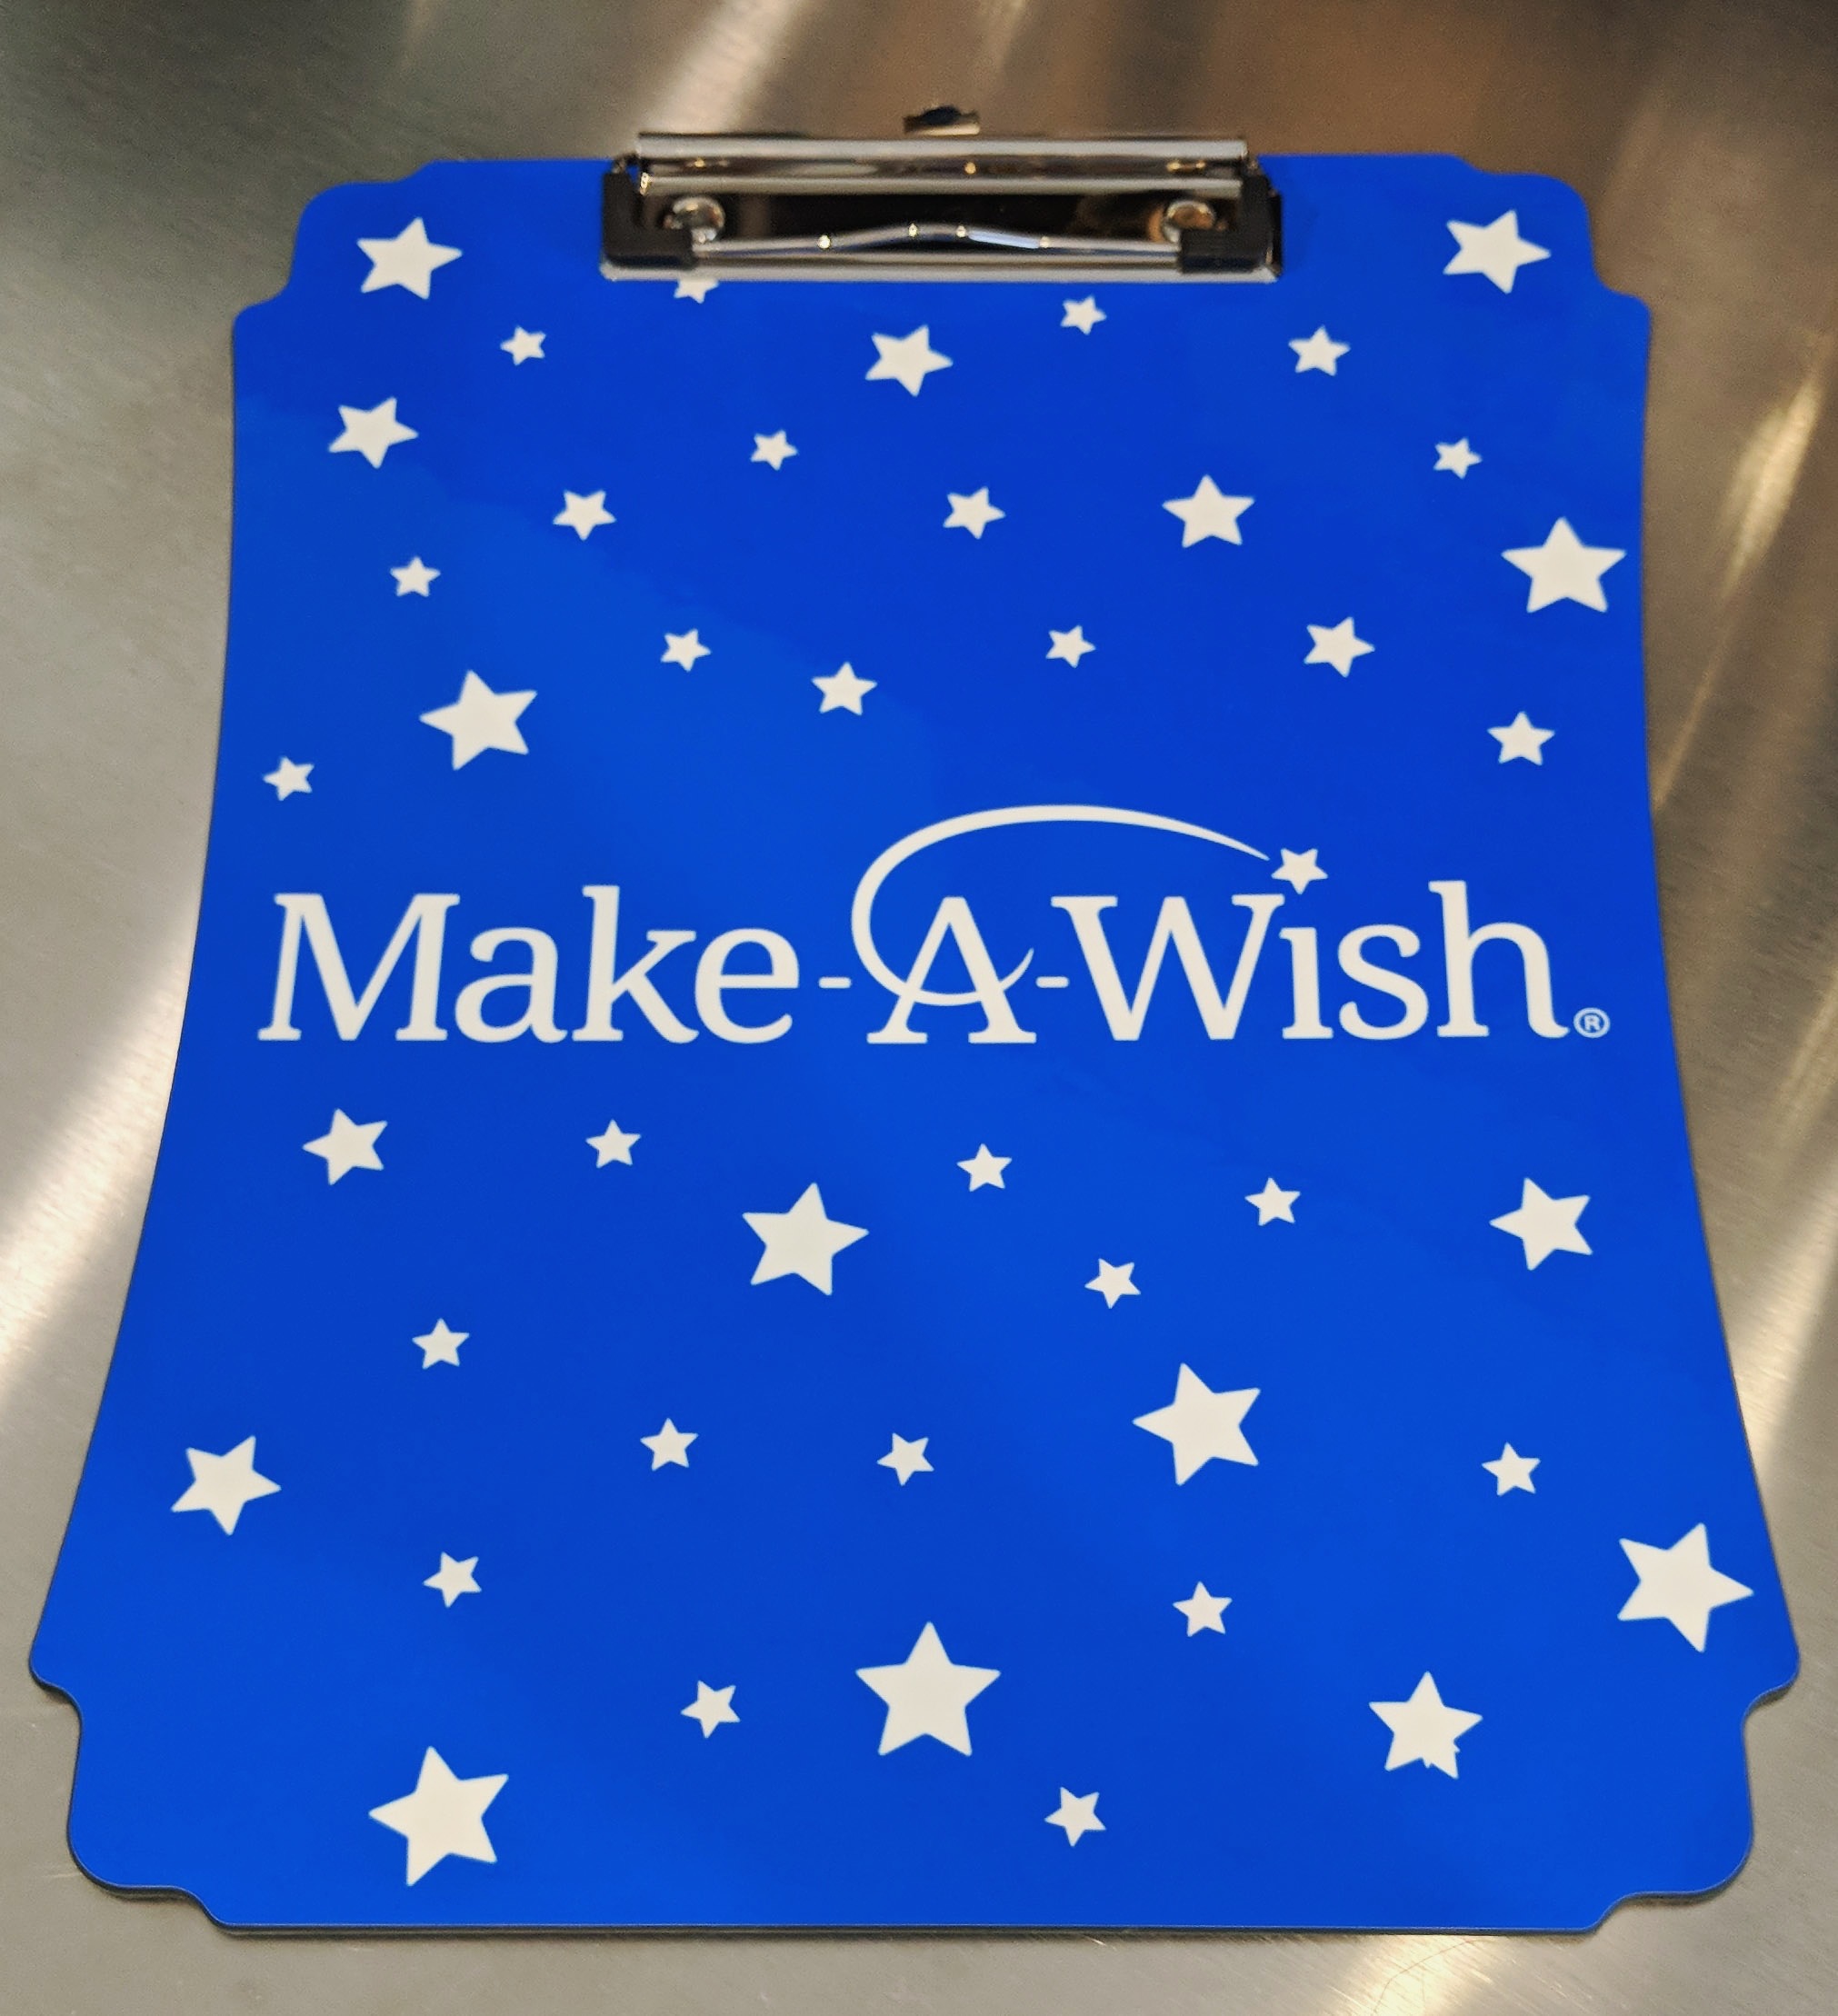 Make-A-Wish Clipboard made with sublimation printing